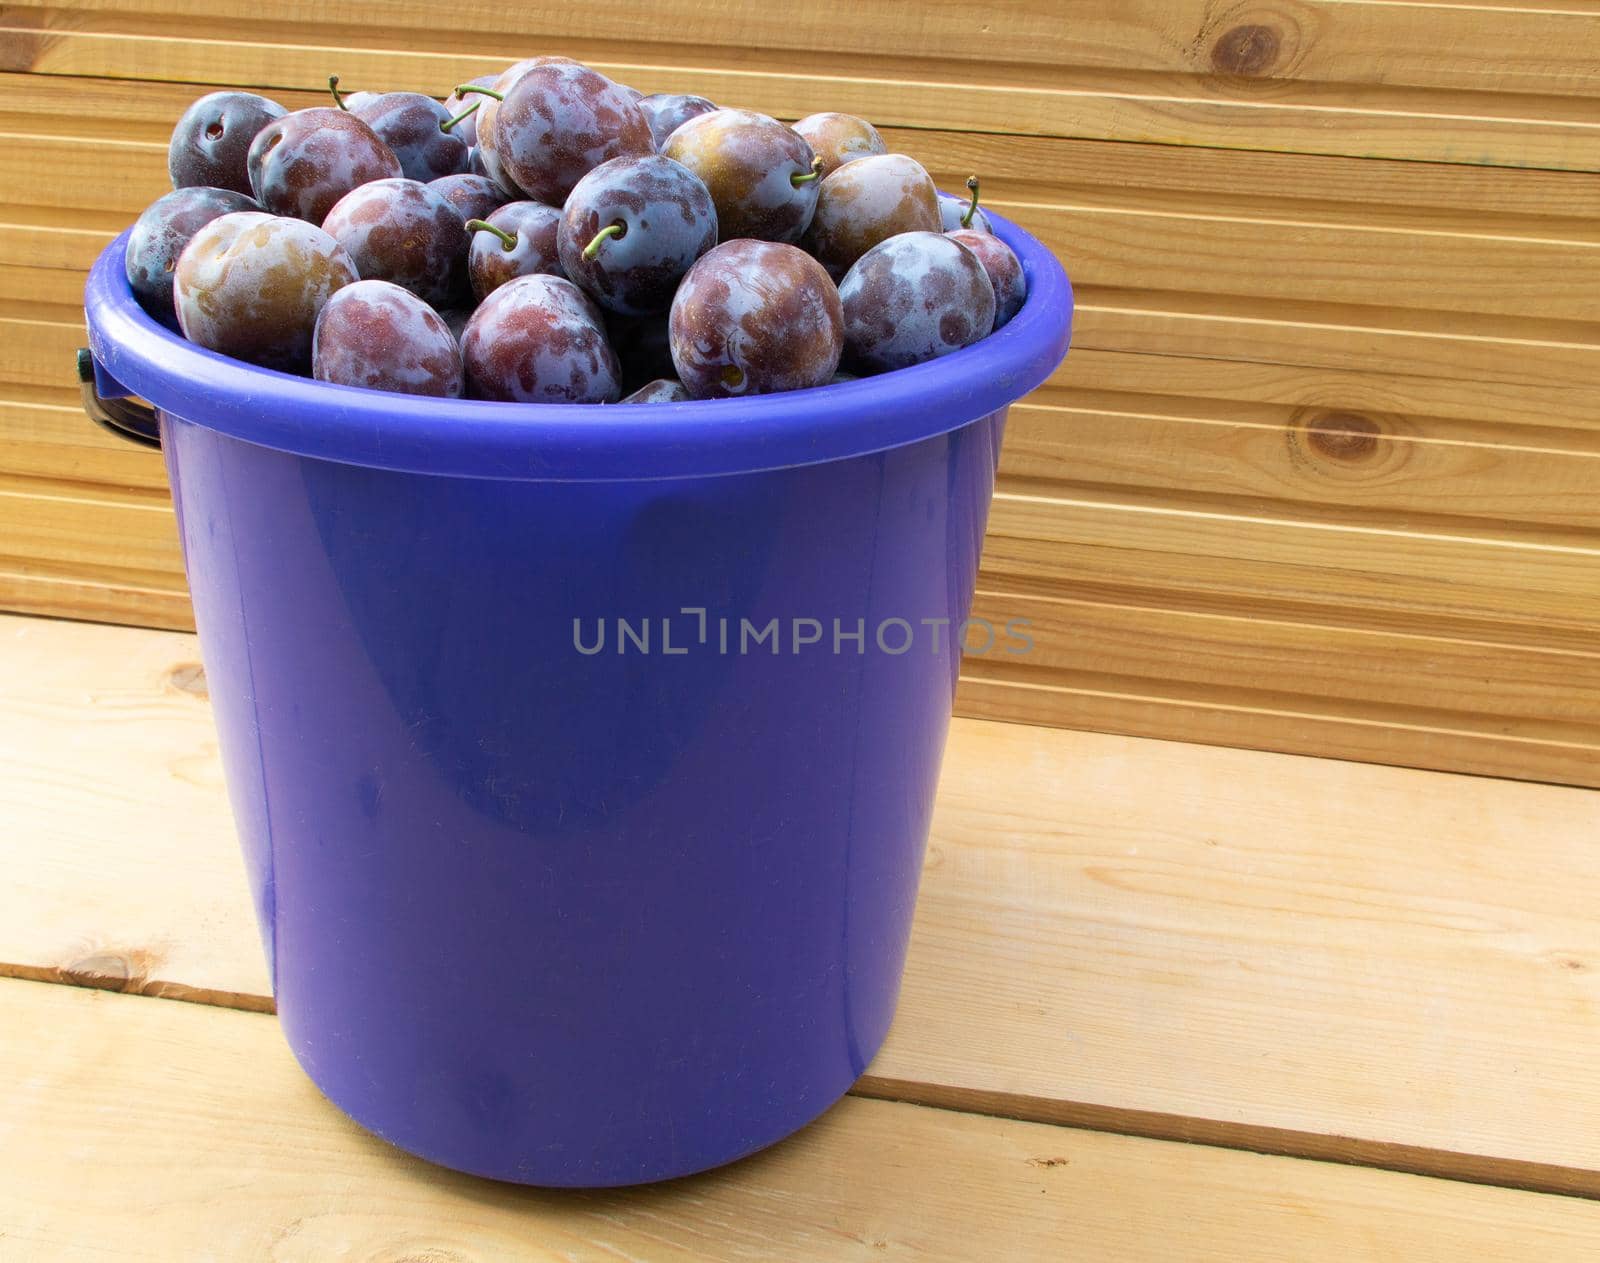 A bucket full of fresh plums on wooden background.